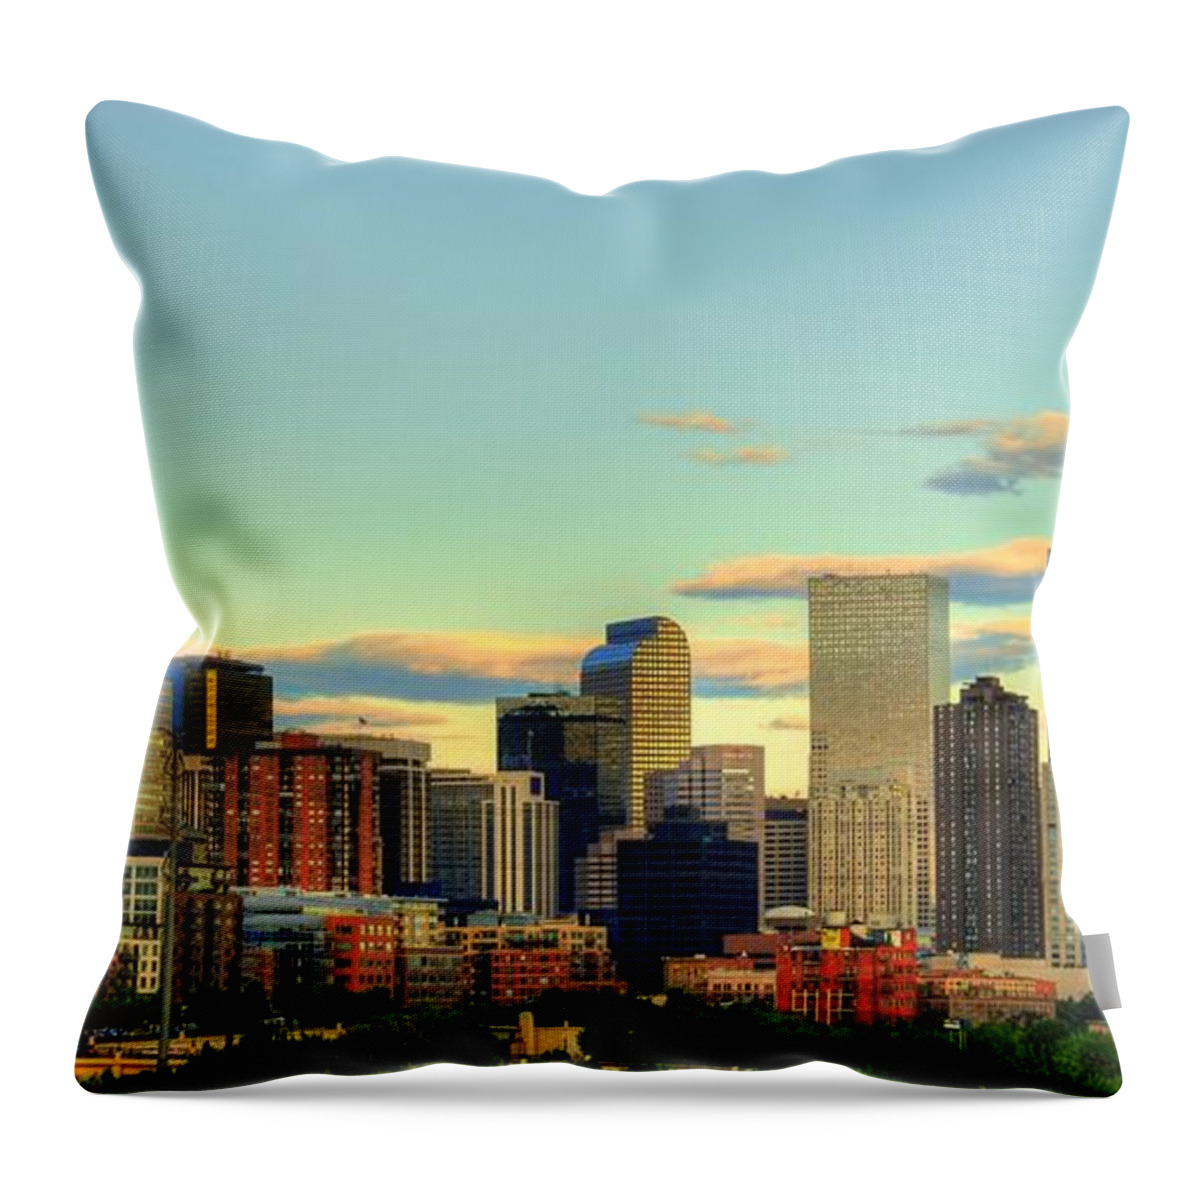 Denver Skyline Throw Pillow featuring the photograph The Mile High City by Anthony Wilkening